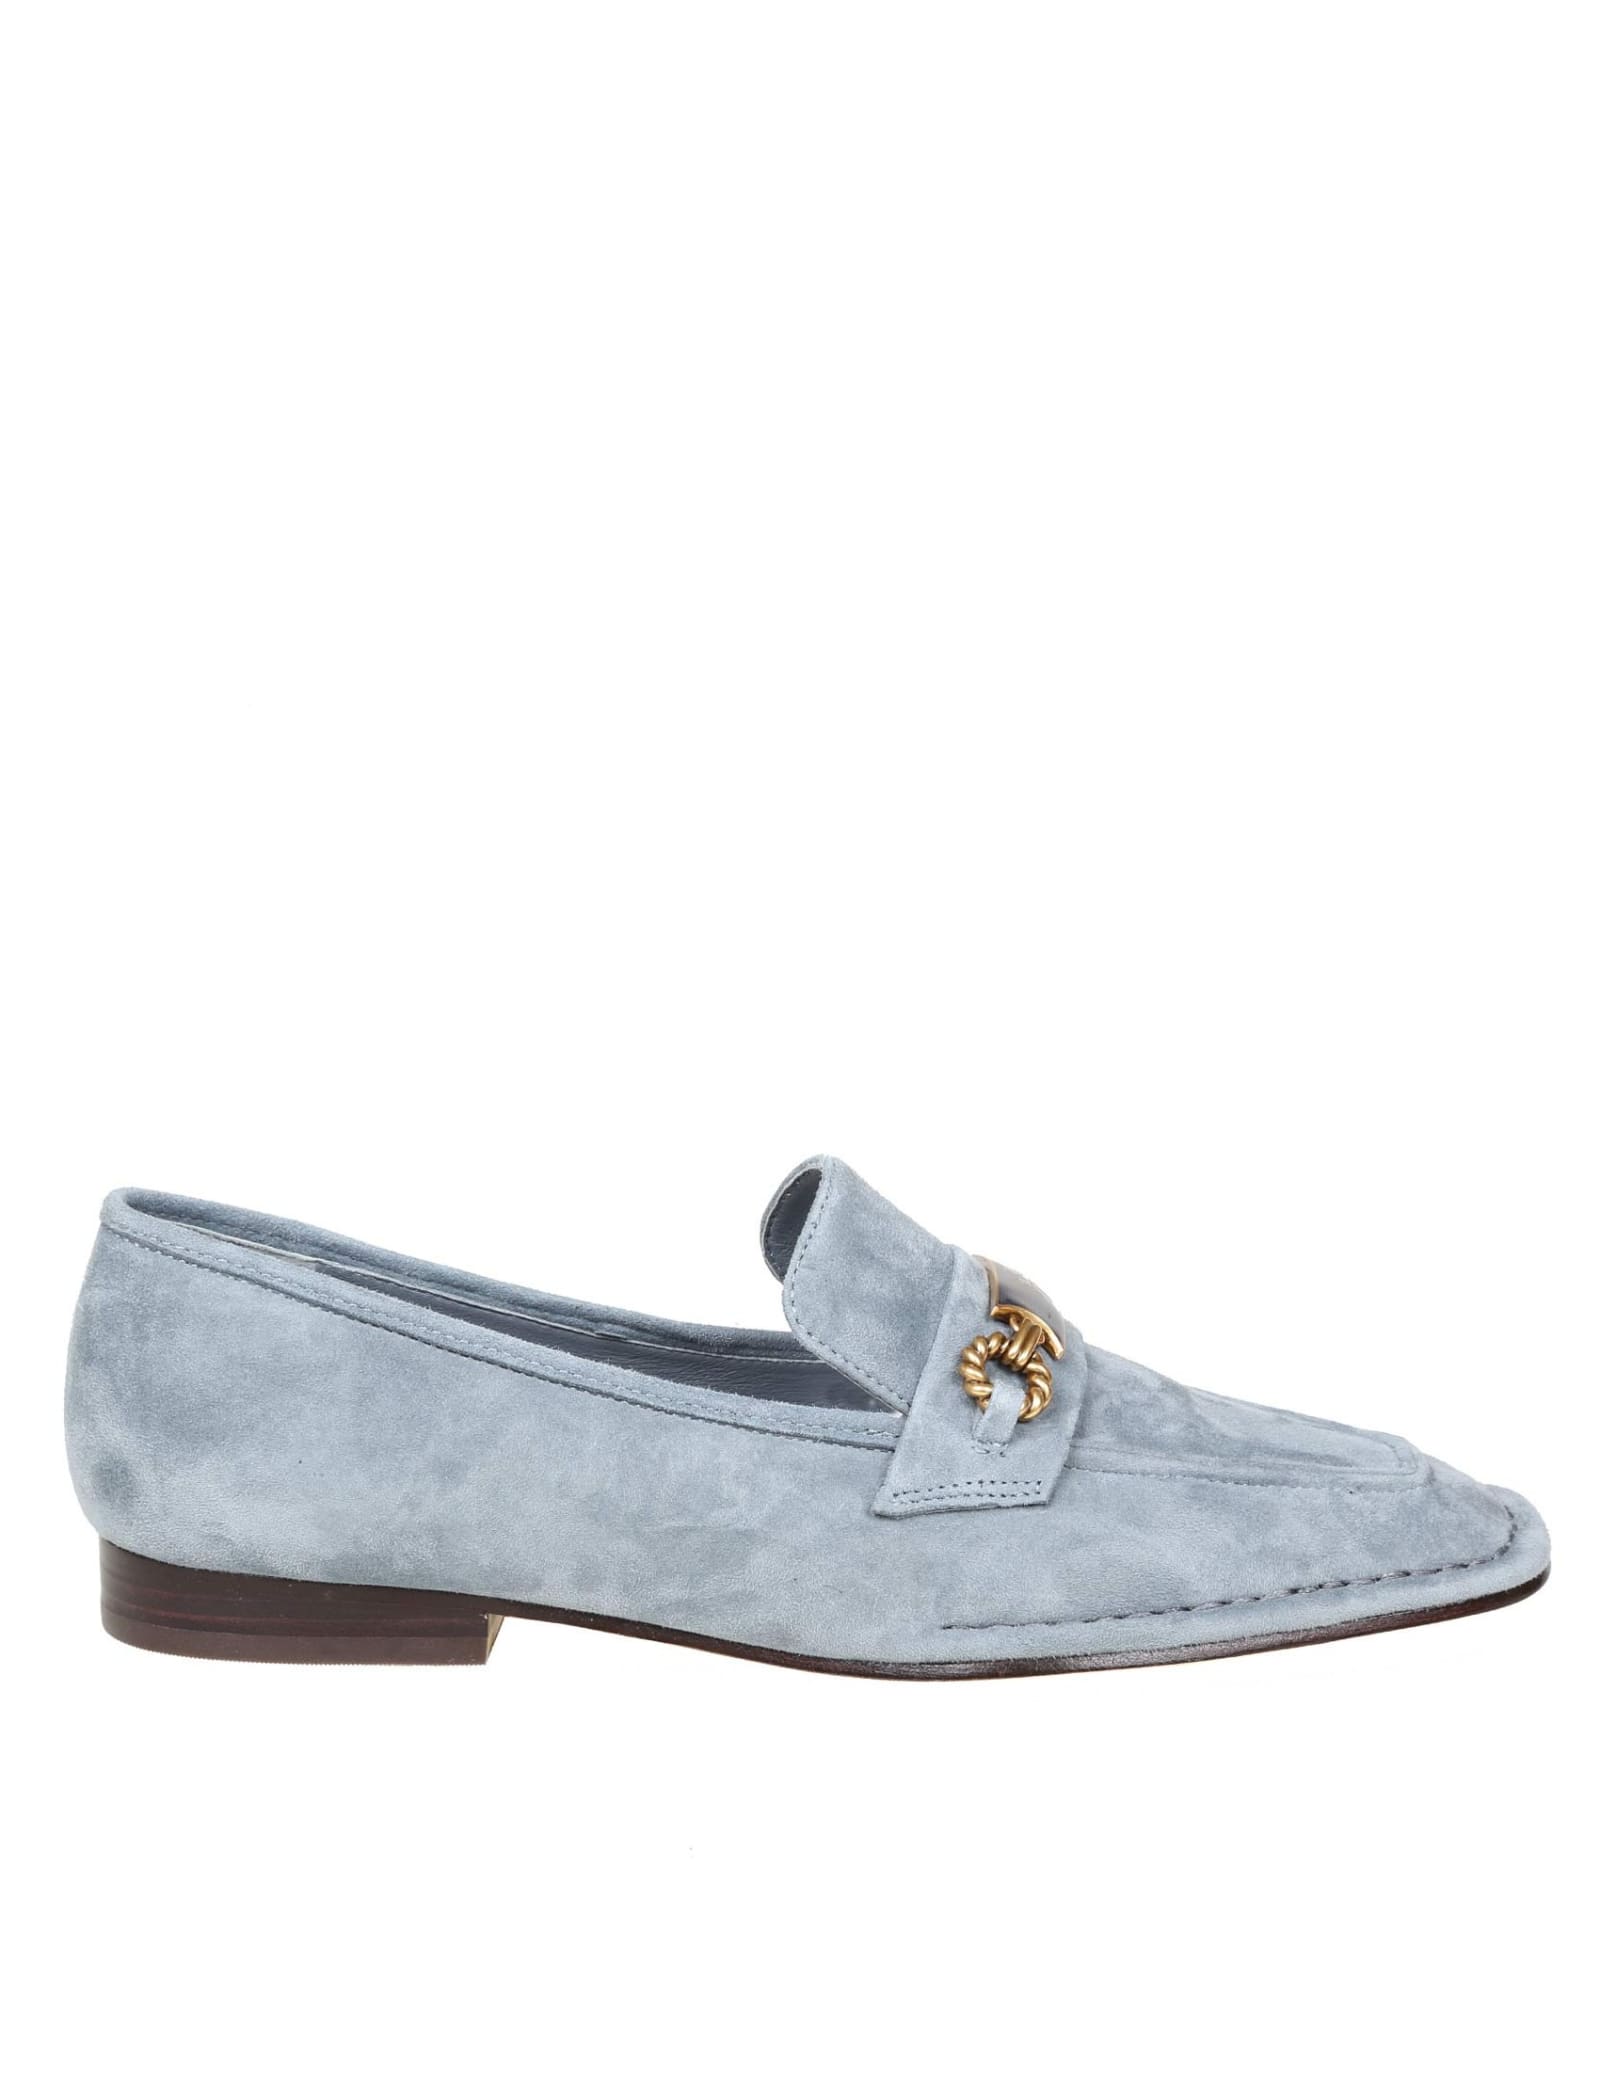 Tory Burch Perrine Loafer In Light Blue Suede